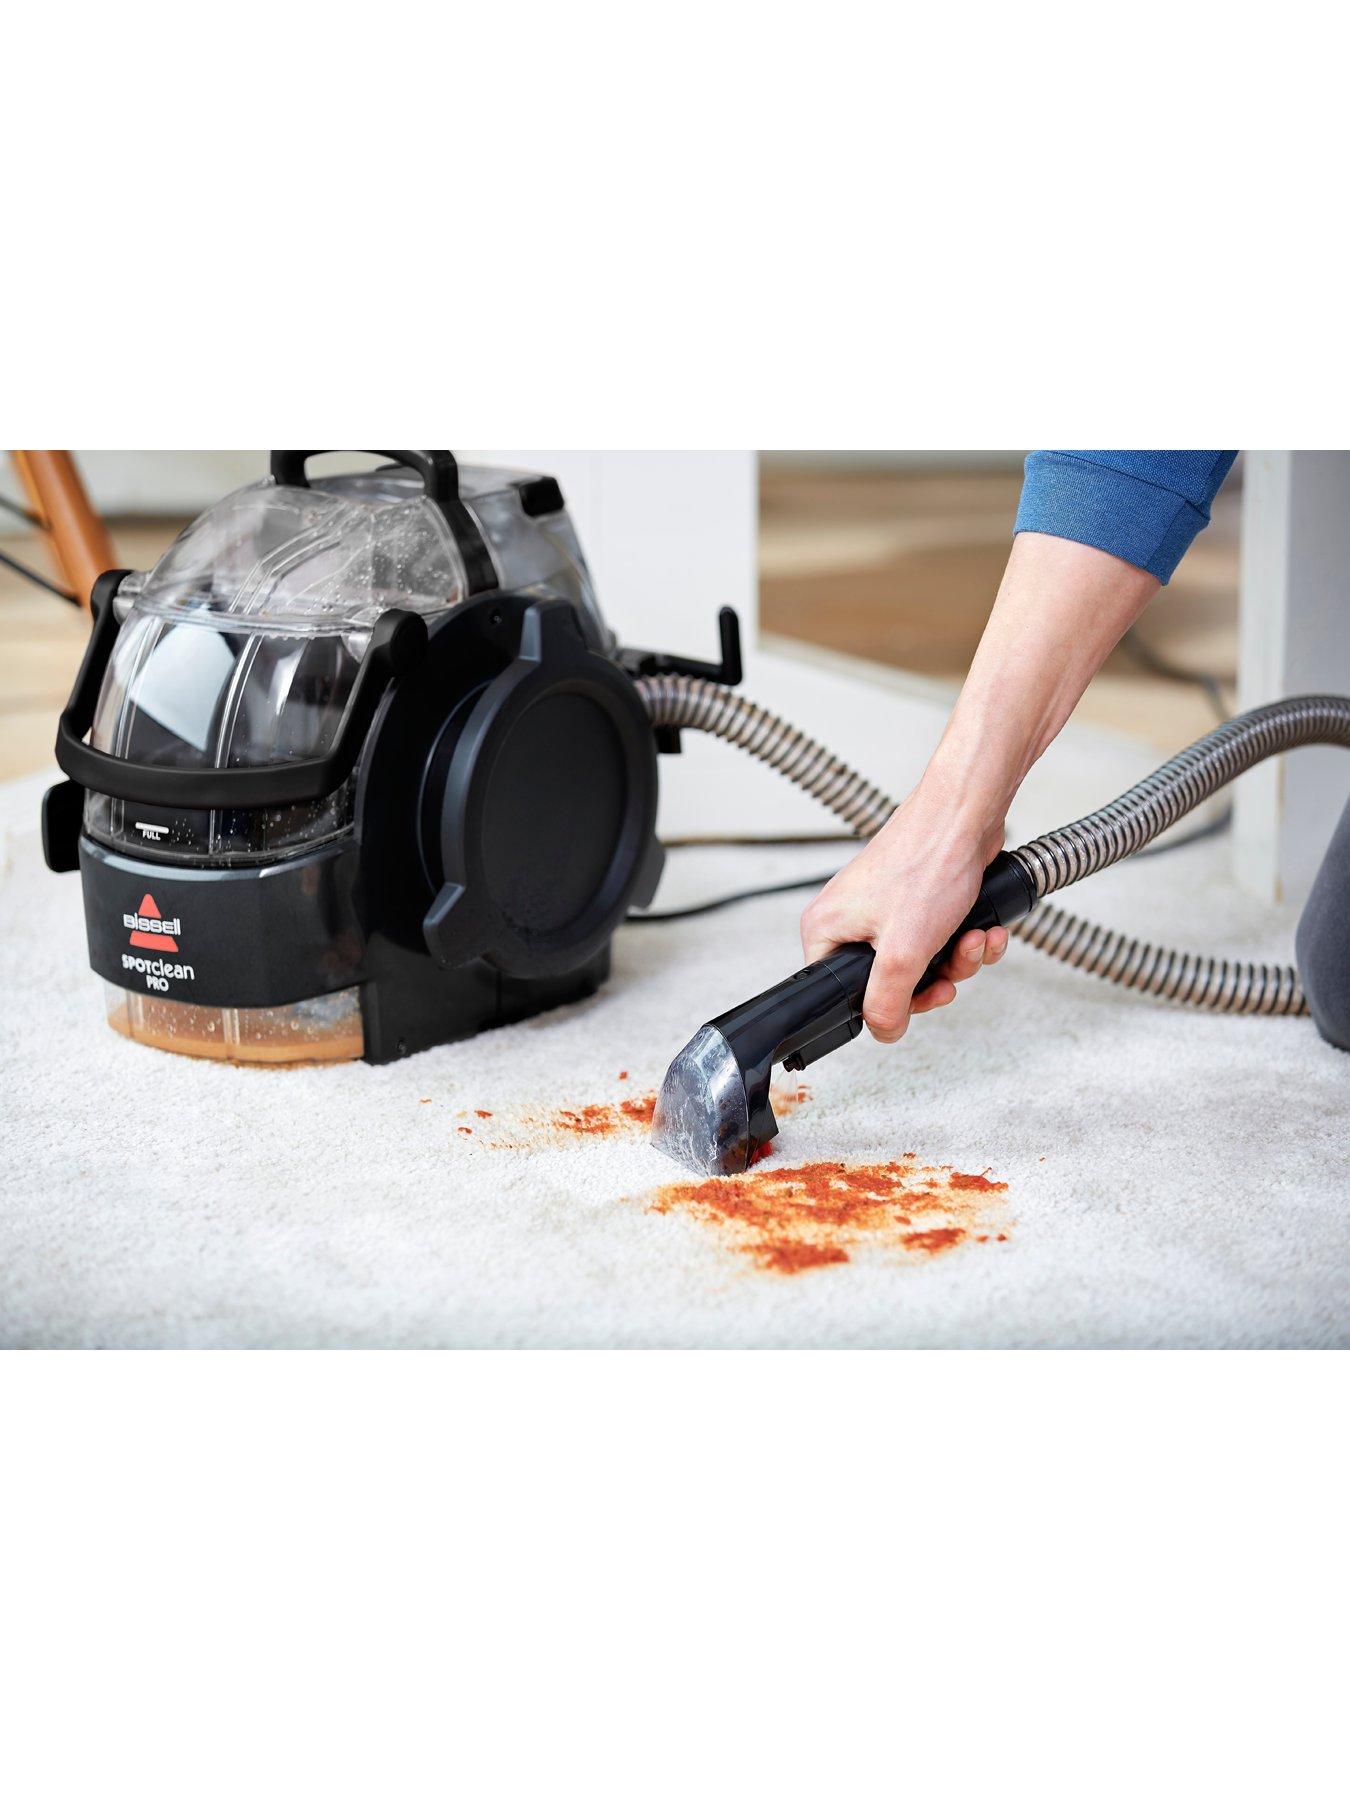 Bissell Spotclean Pro 3624 Review - Portable Carpet Cleaner 